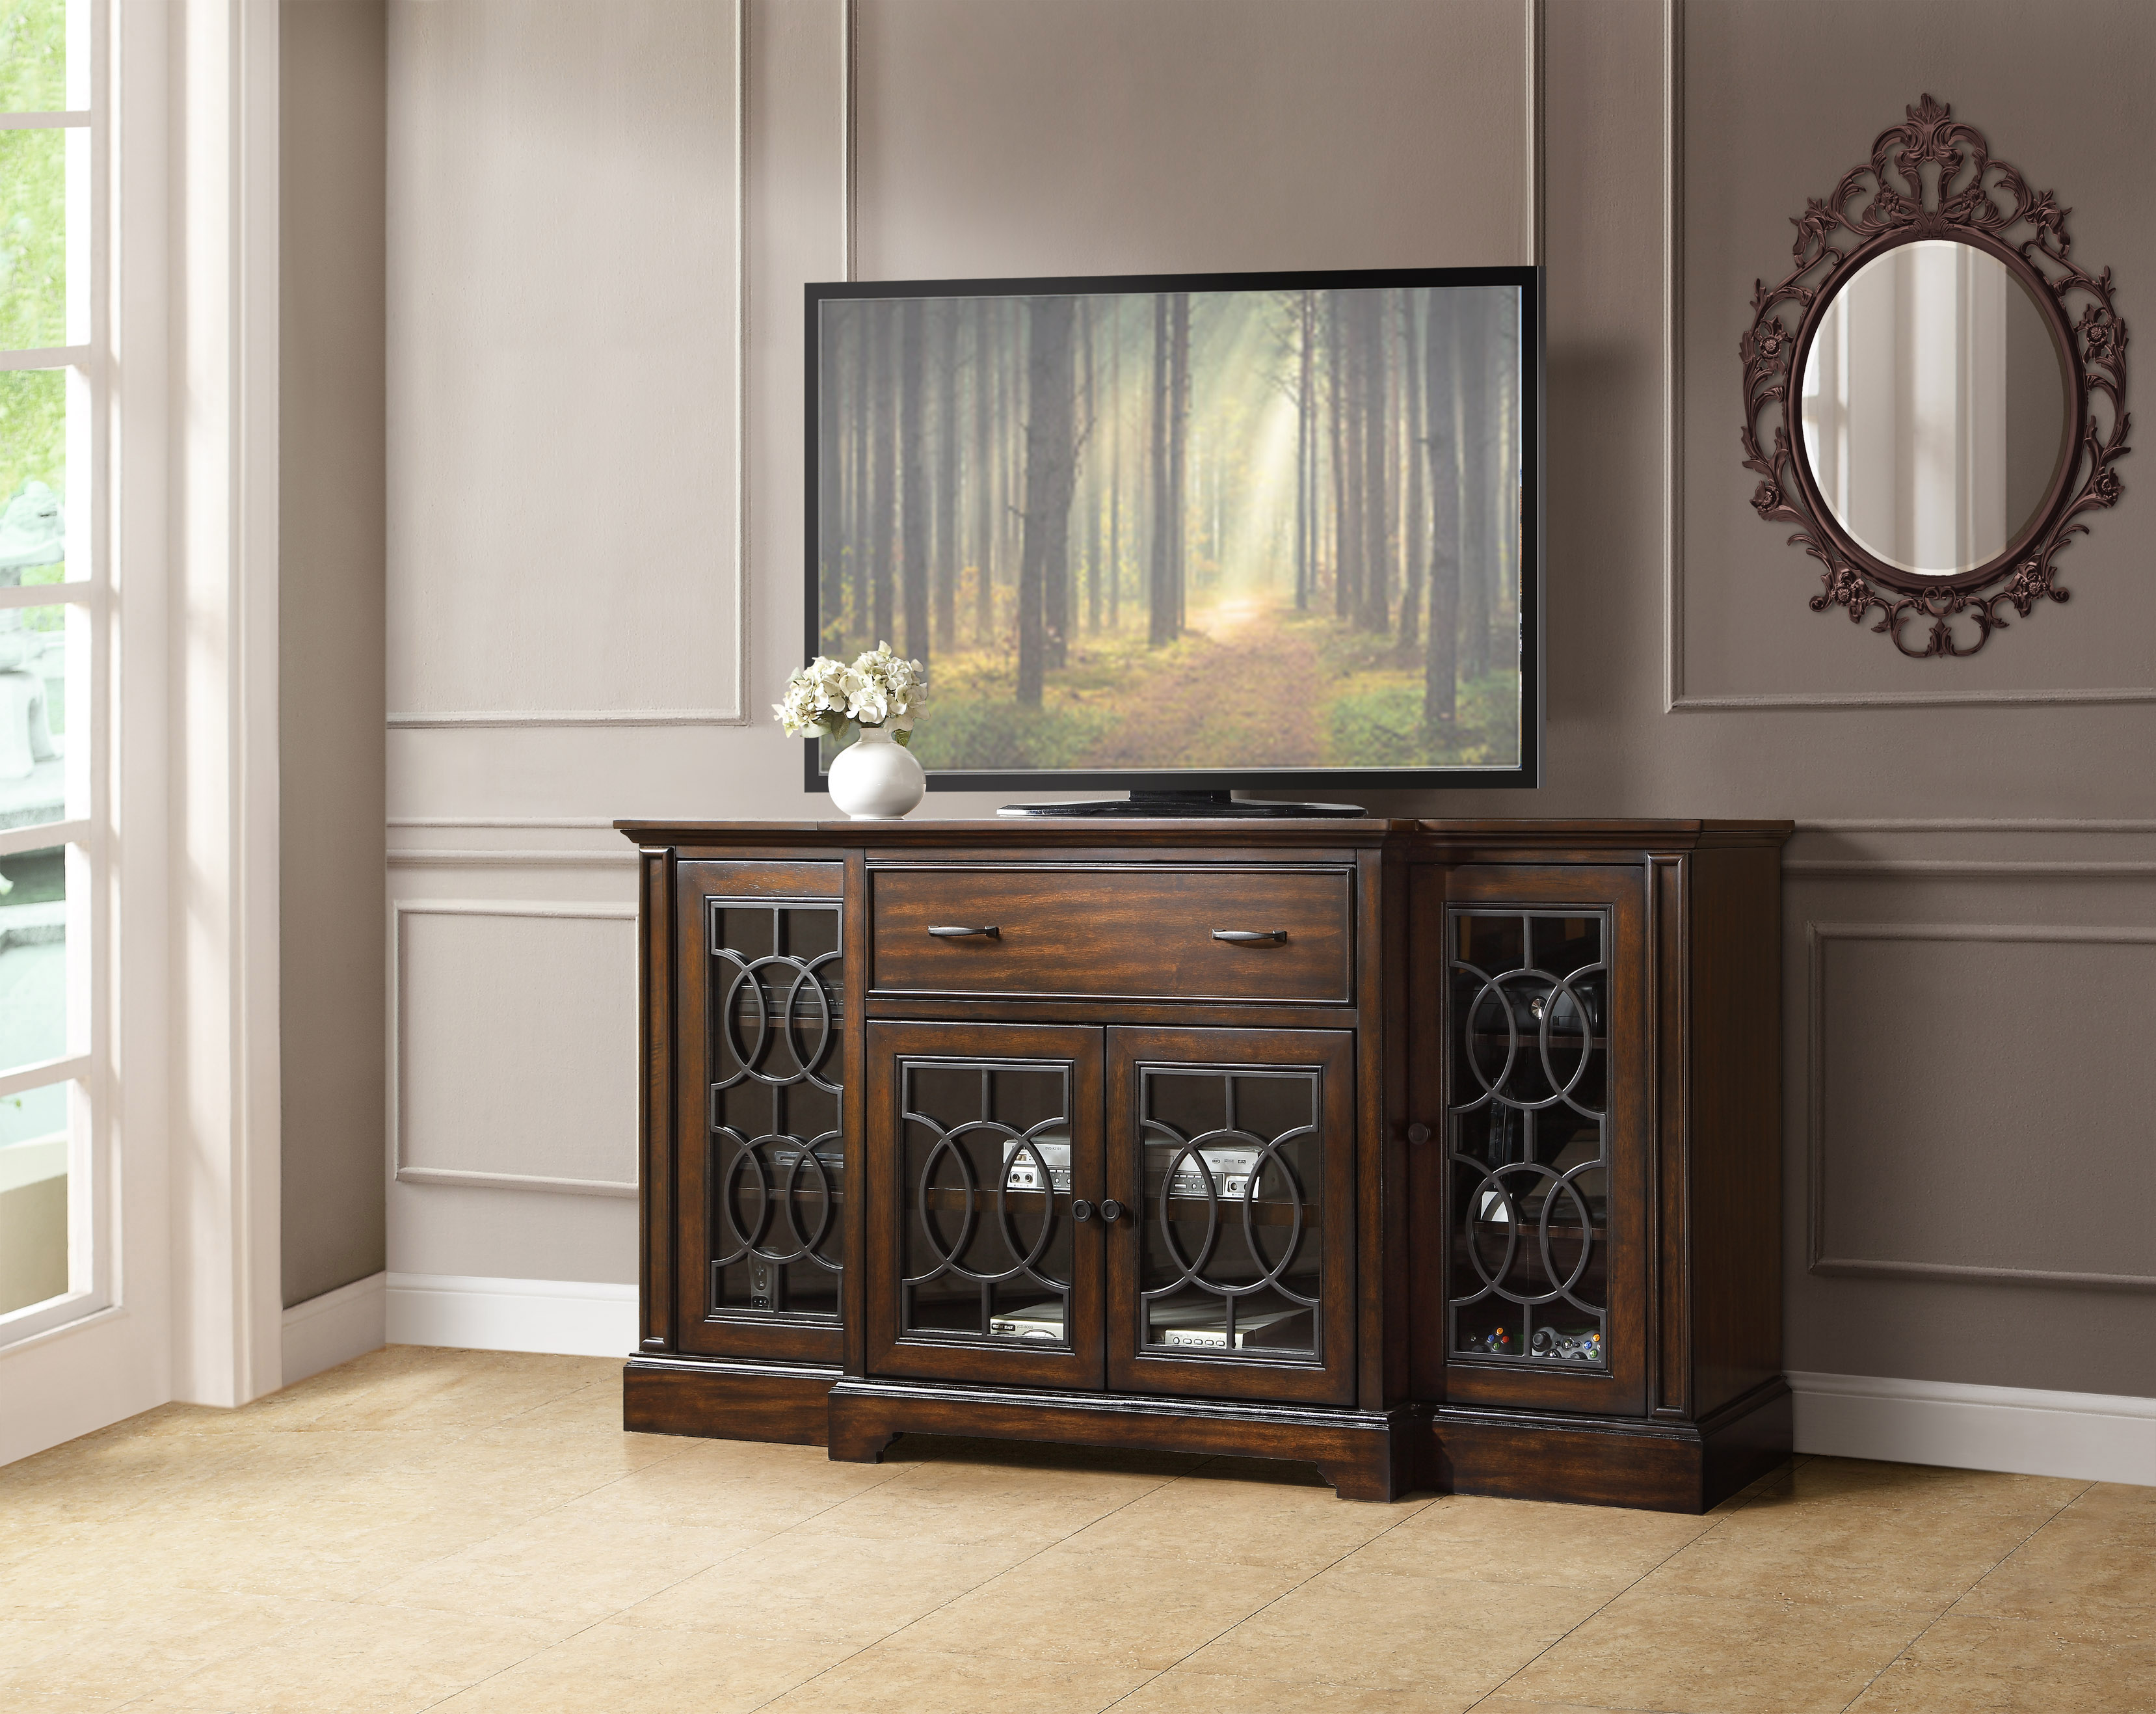 Adult golf Stand up instead TV Consoles - Bayside Furnishings